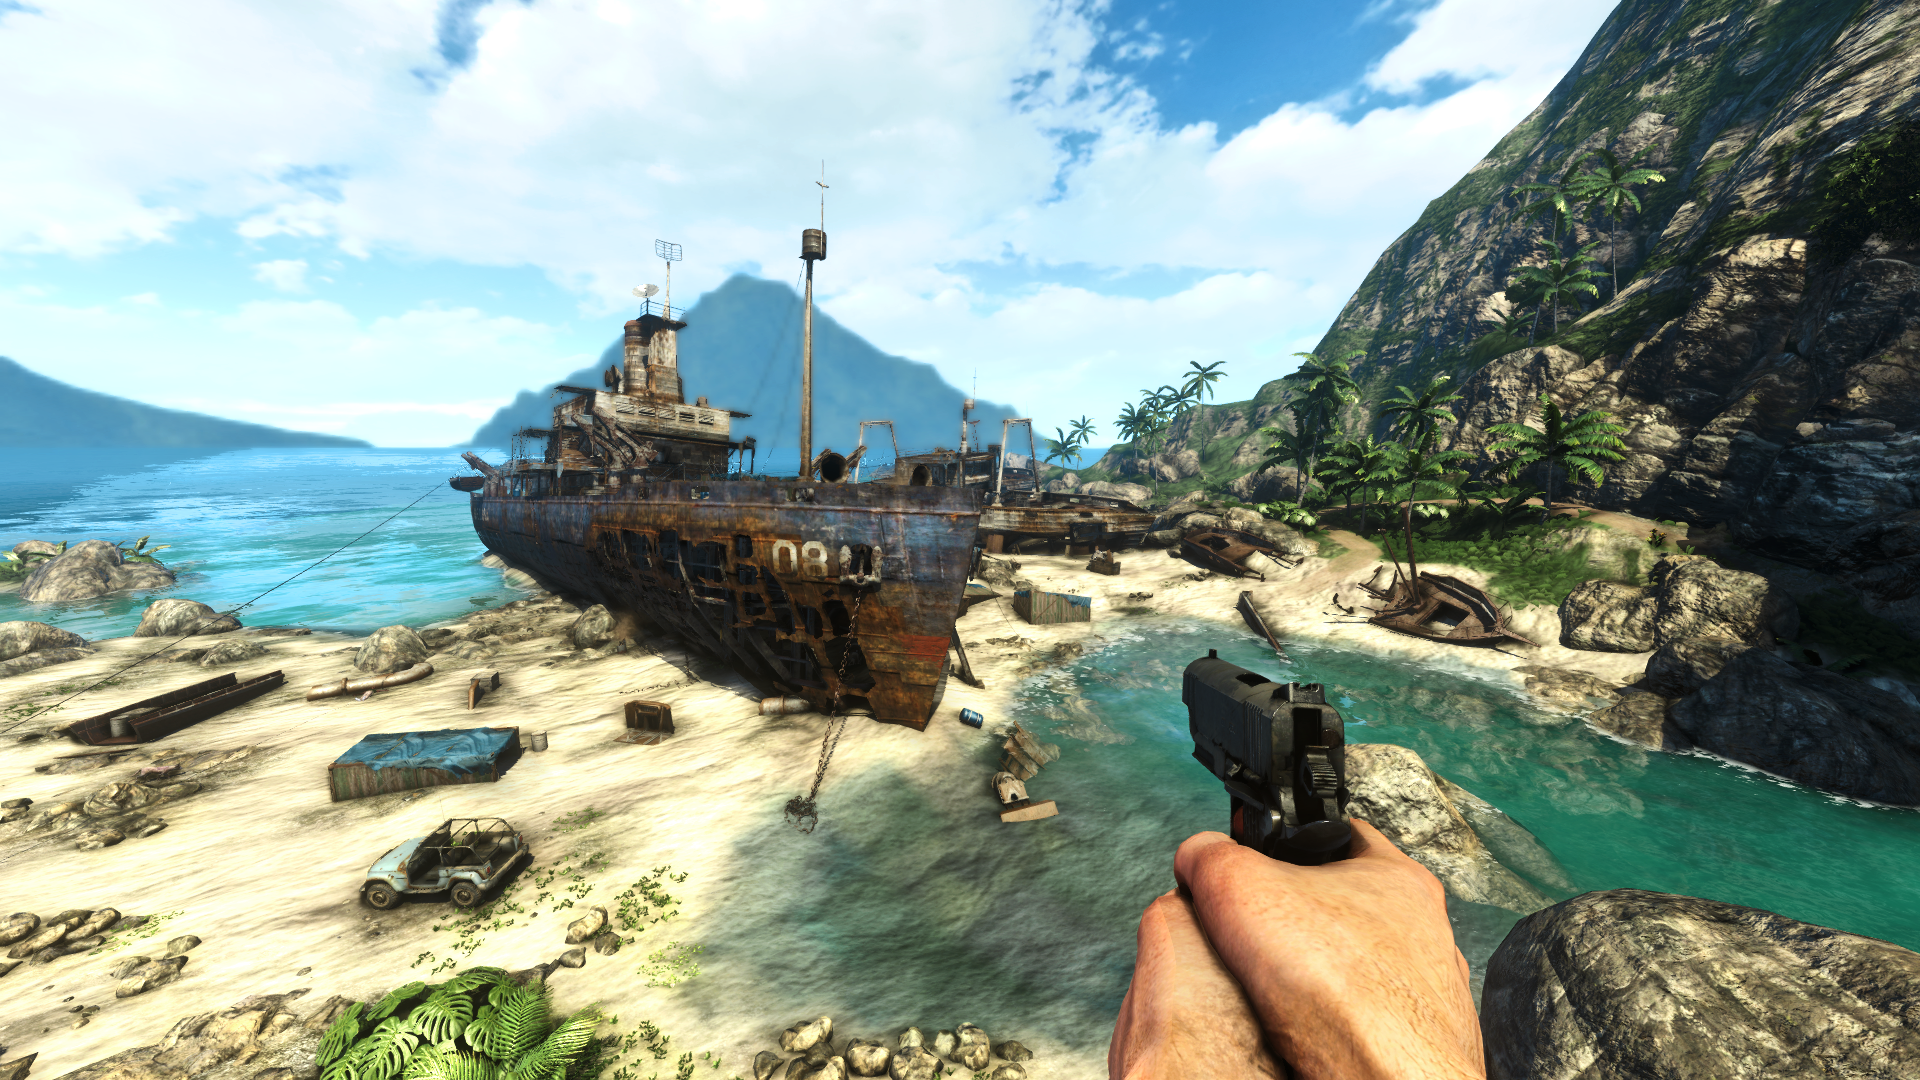 far cry 3 map editor download